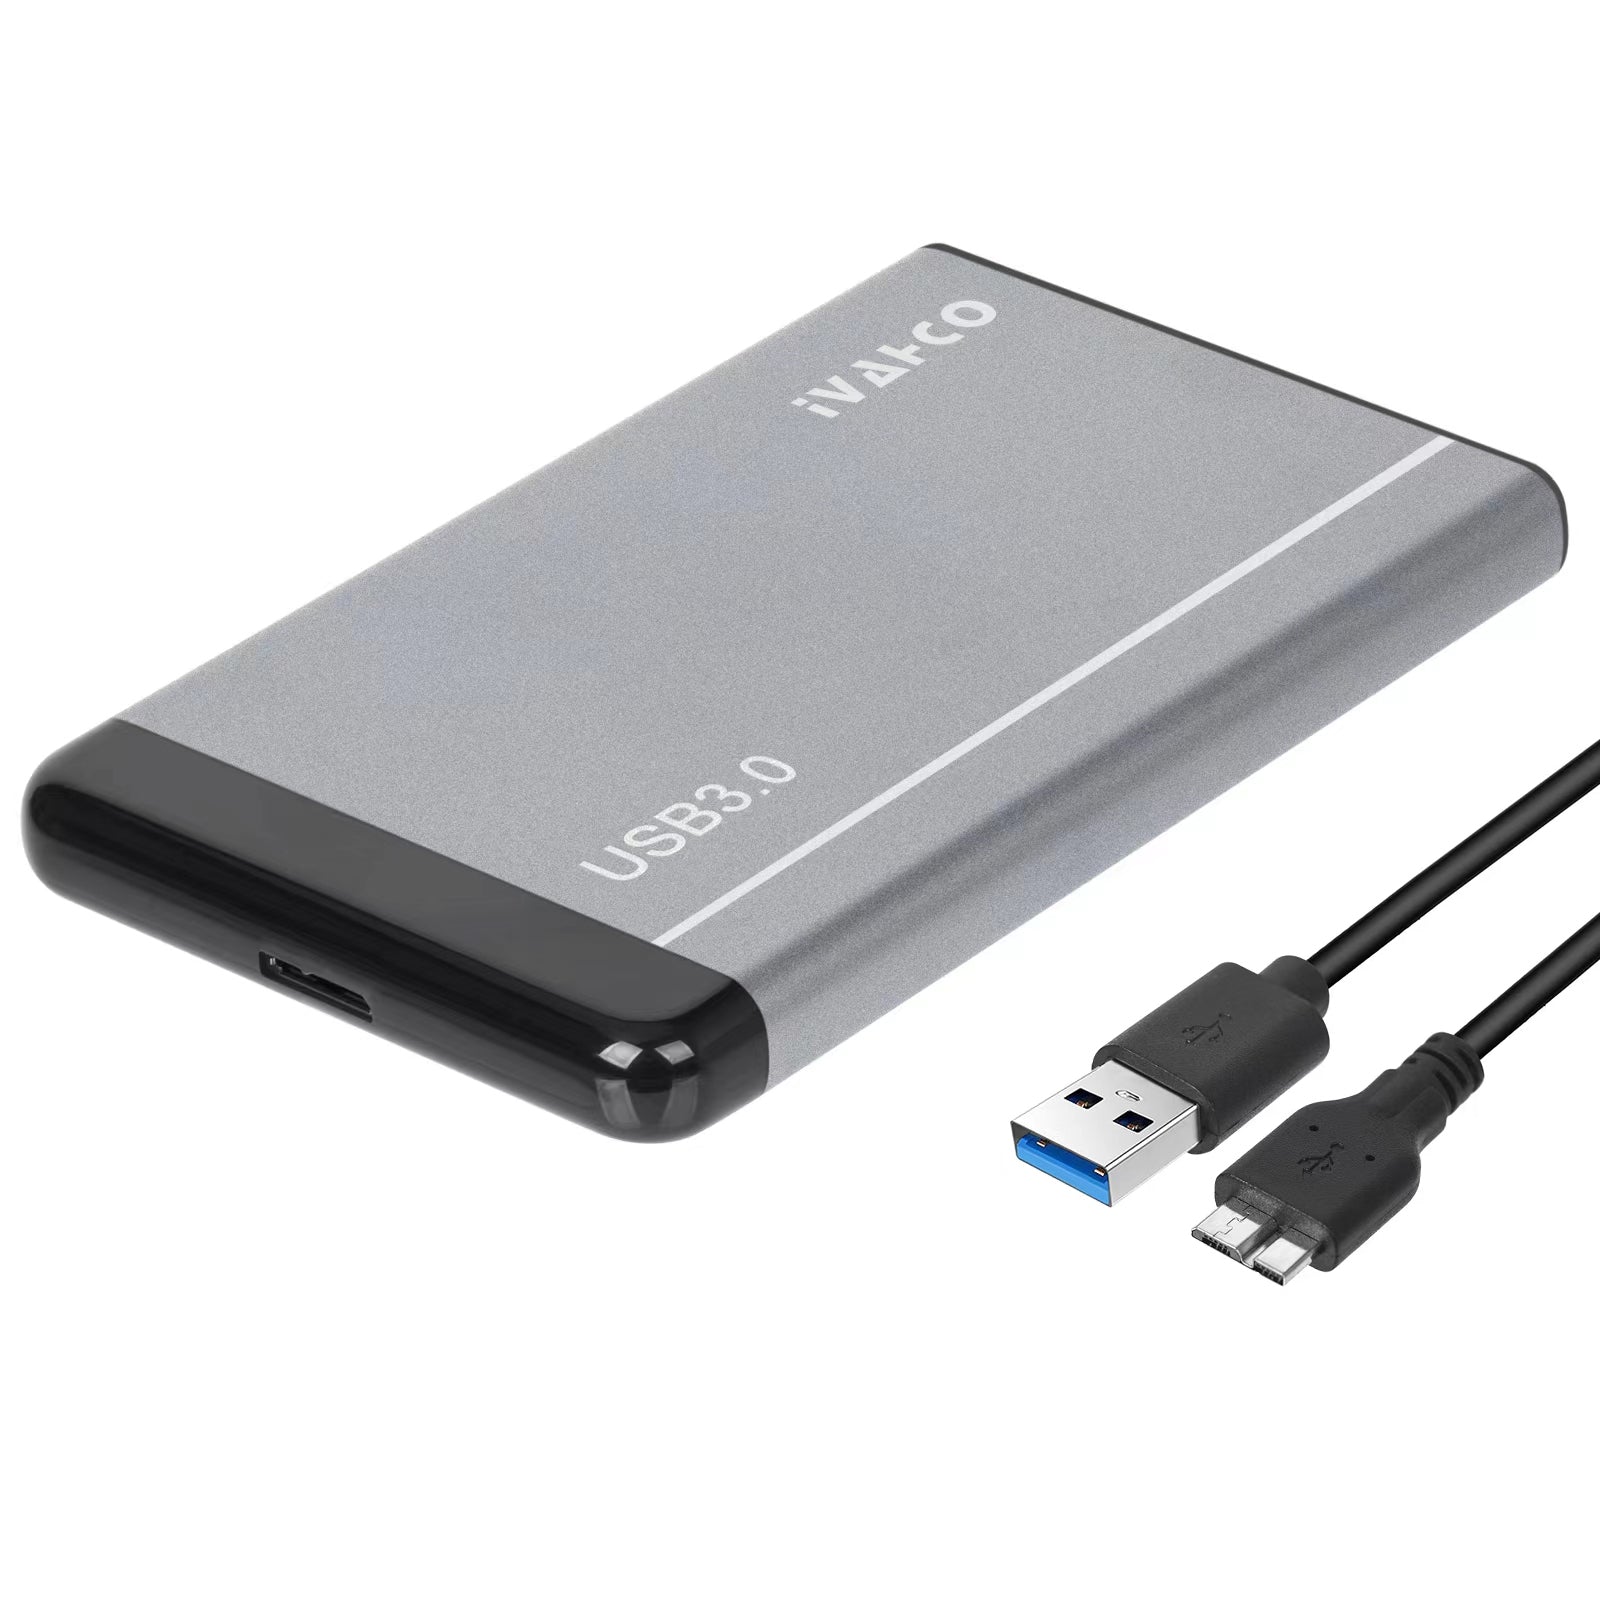 IVAHCO 500GB 2.5" Portable USB3.0 Hard Disk Enclosure Matte HDD External Case Hard Drive Box with Data Cable - Grey